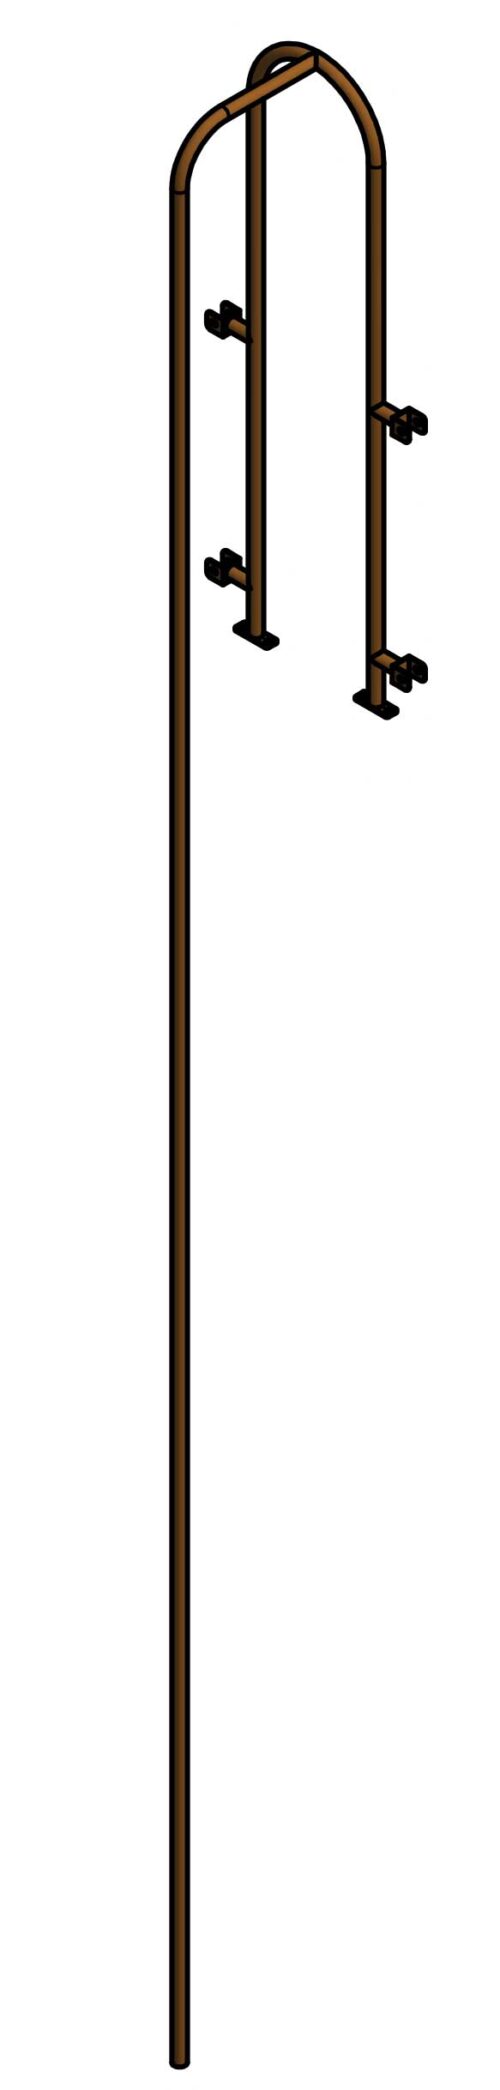 A fireman's pole consisting of a fully powder coated tube measuring 1.5 inches in diameter and brown in color.